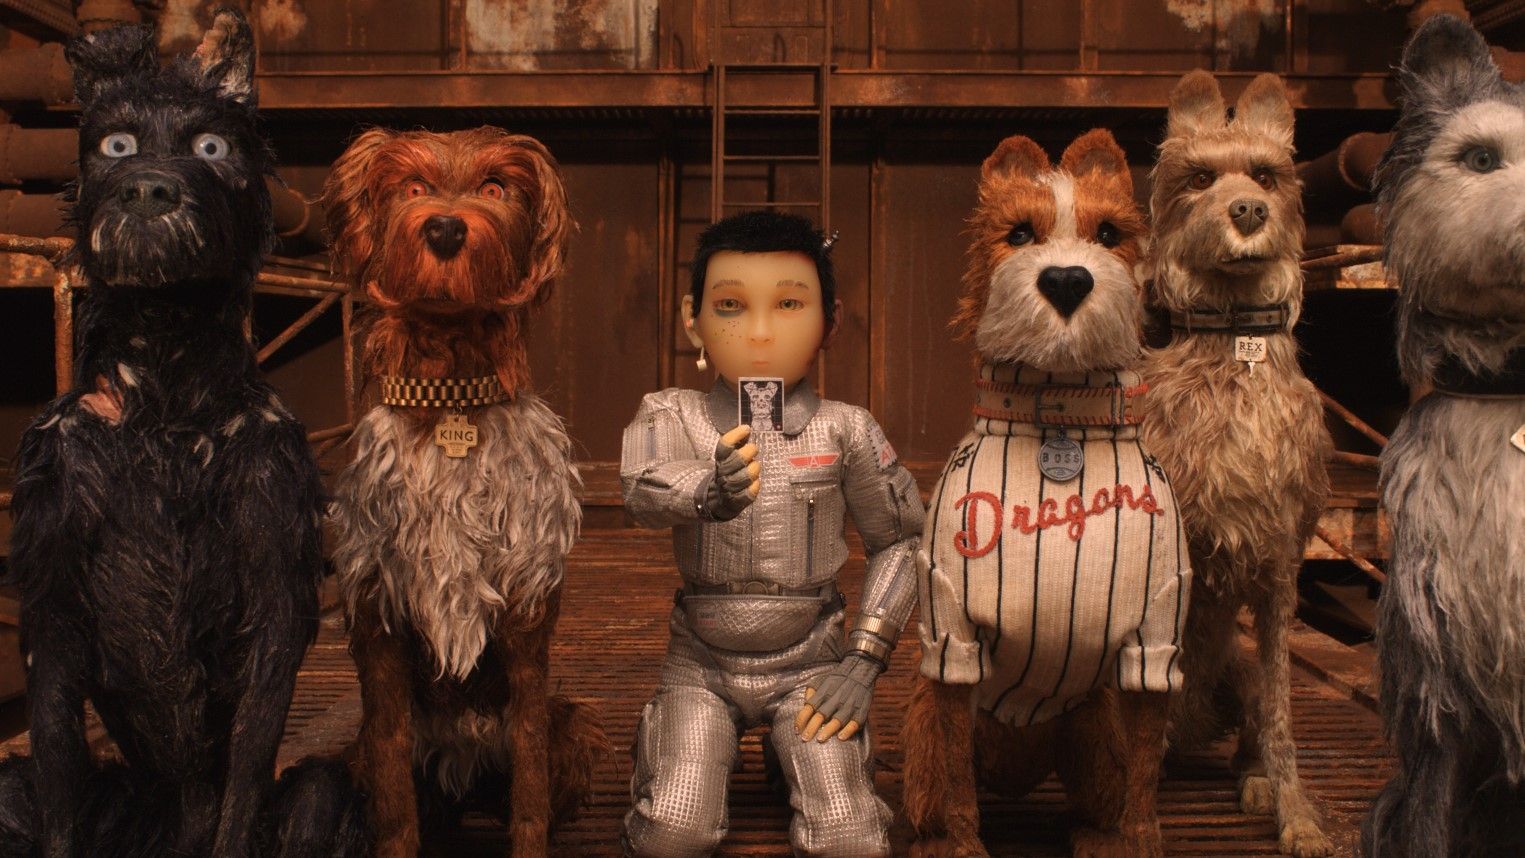 <p>                     Anderson returned to the stop-motion animation style that he so wonderfully took to with <em><strong>Fantastic Mr. Fox</strong></em> in <em><strong>Isle of Dogs</strong></em>, though it was always going to be tough to live up to his first animated outing. That’s no slight against <em><strong>Isle of Dogs</strong></em>, which is a fun, incredibly made tale of a boy trying to find his dog that was exiled to the titular island with the help of a ragtag group of strays. The reason that it sits so low in this list is one, something had to, and two, when picking between <em><strong>Isle of Dogs</strong></em> and <em><strong>Fantastic Mr. Fox</strong></em>, I’ll always give the edge to the latter.                    </p>